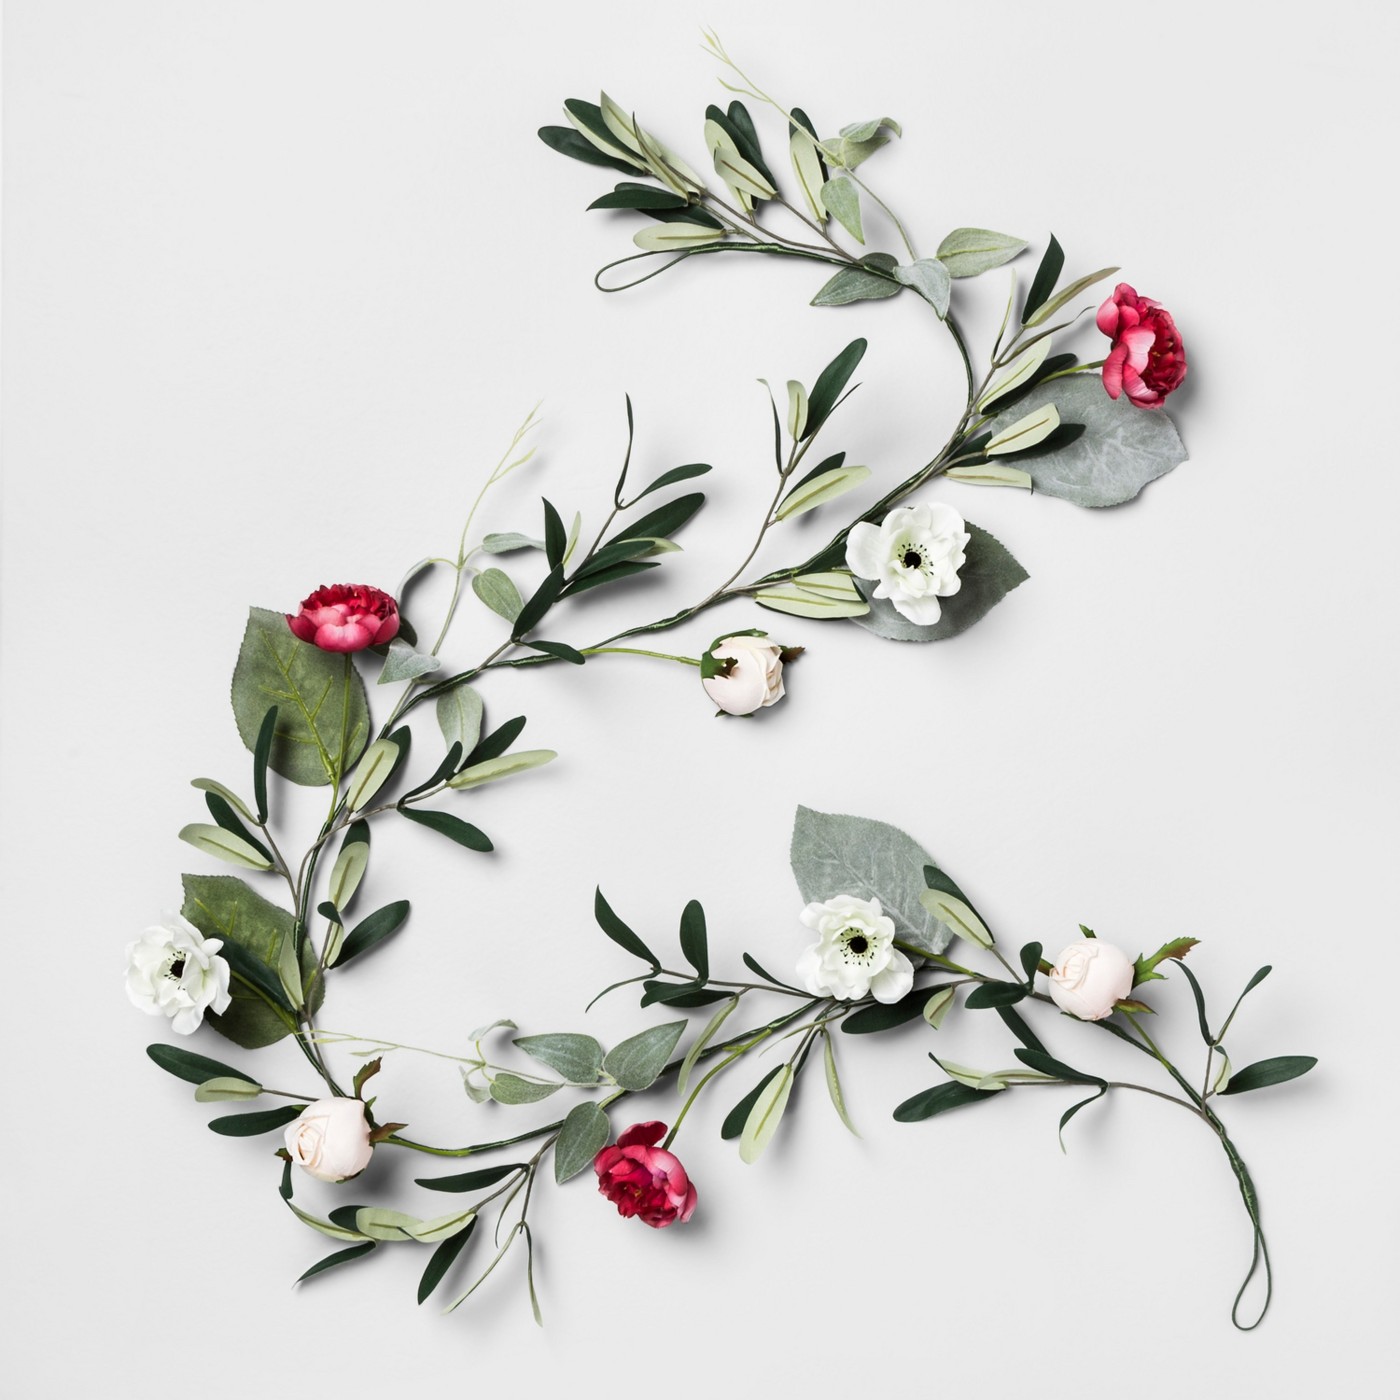 60" x 5" Artificial Rose And Olive Garland - Opalhouseâ„¢ - image 1 of 1